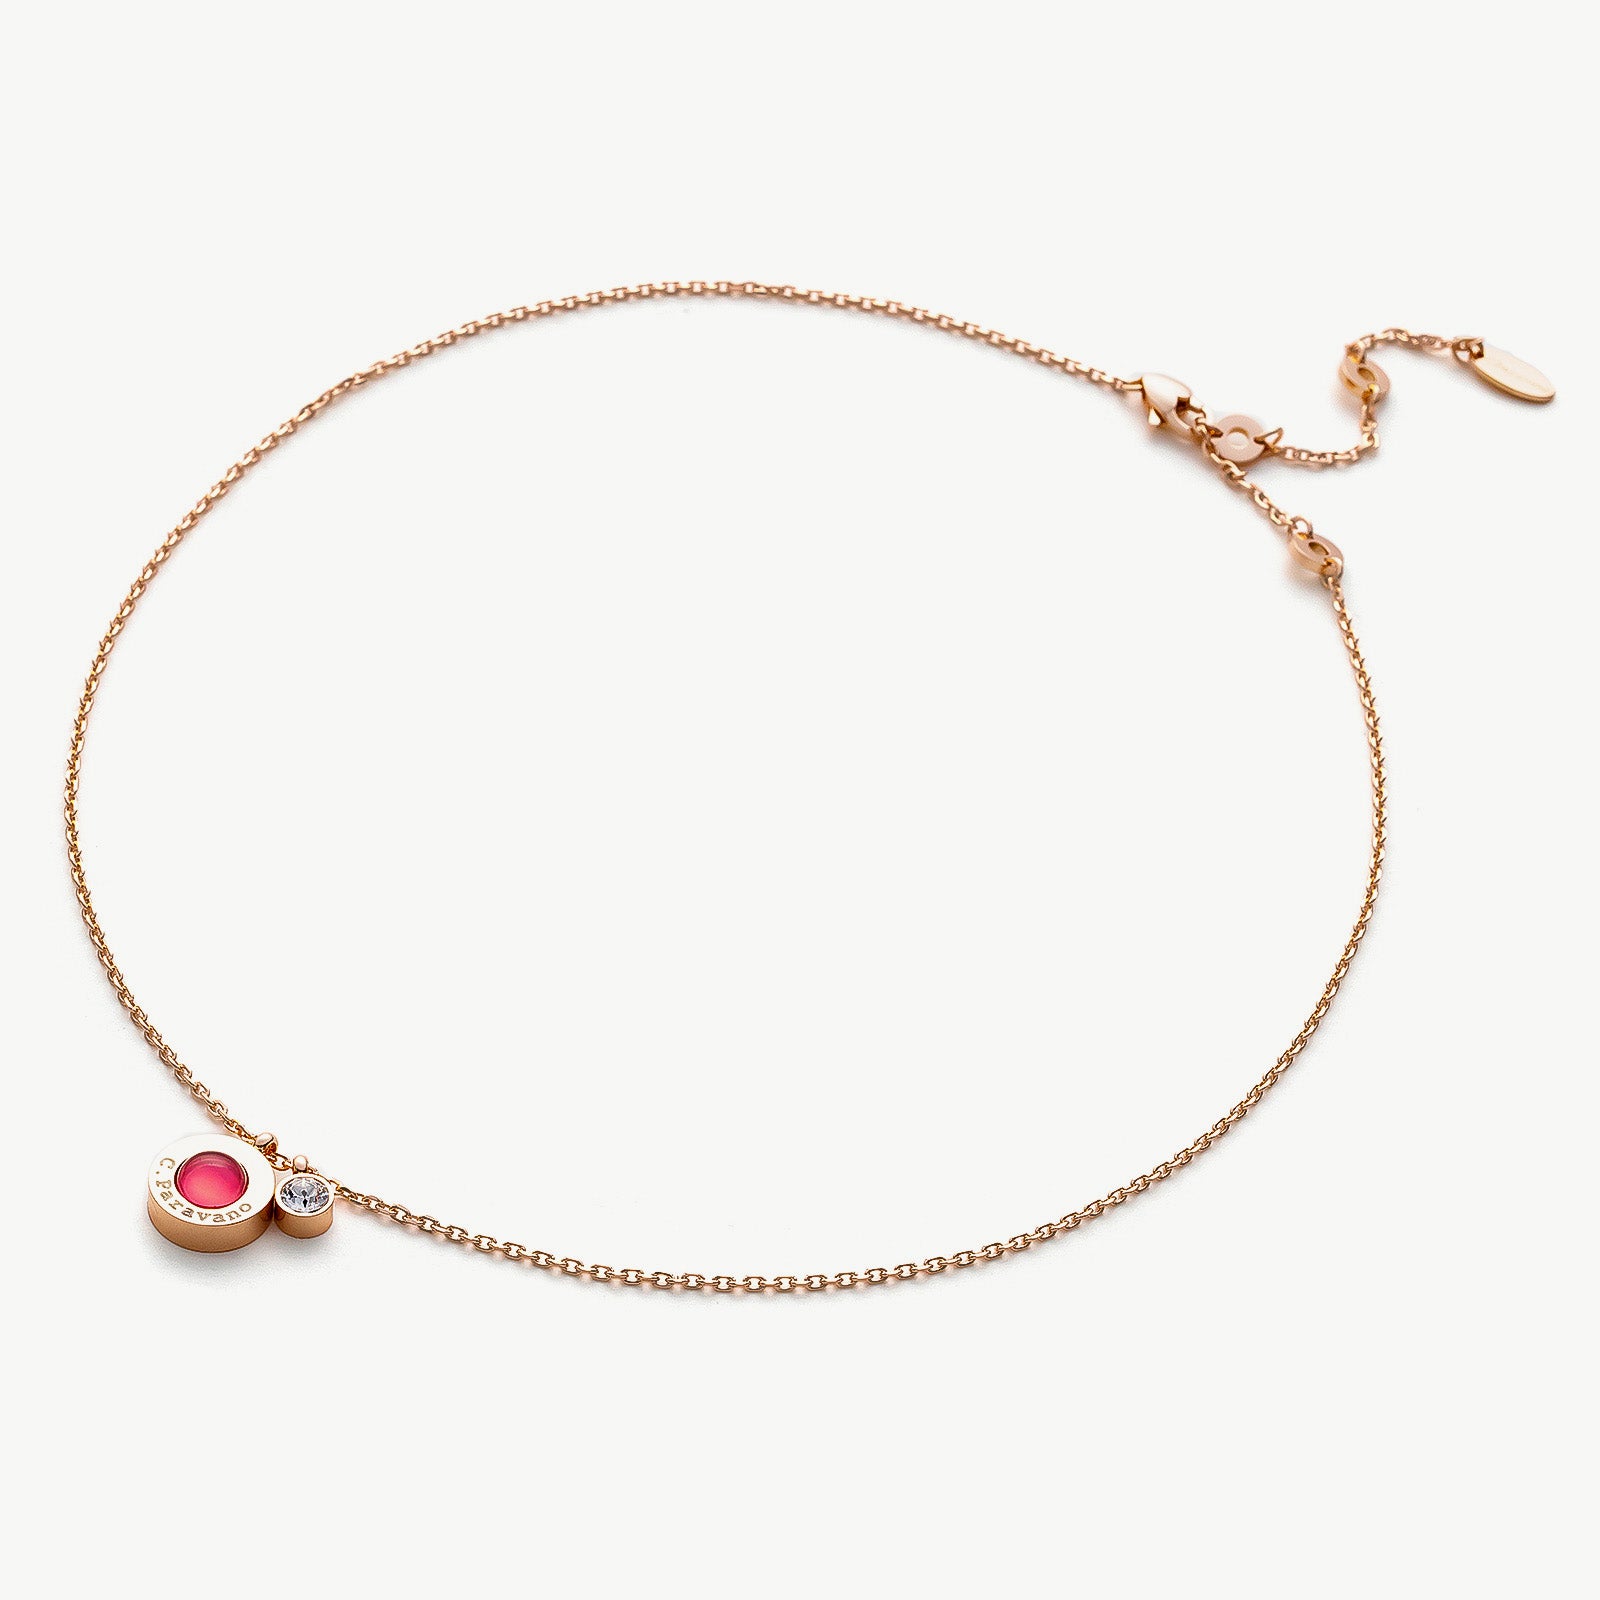  Rose Gold Crystal Dew Necklace in Red, showcasing vivid red elegance, this necklace features a red crystal dew pendant on a delicate rose gold chain, creating a versatile and chic accessory for any outfit